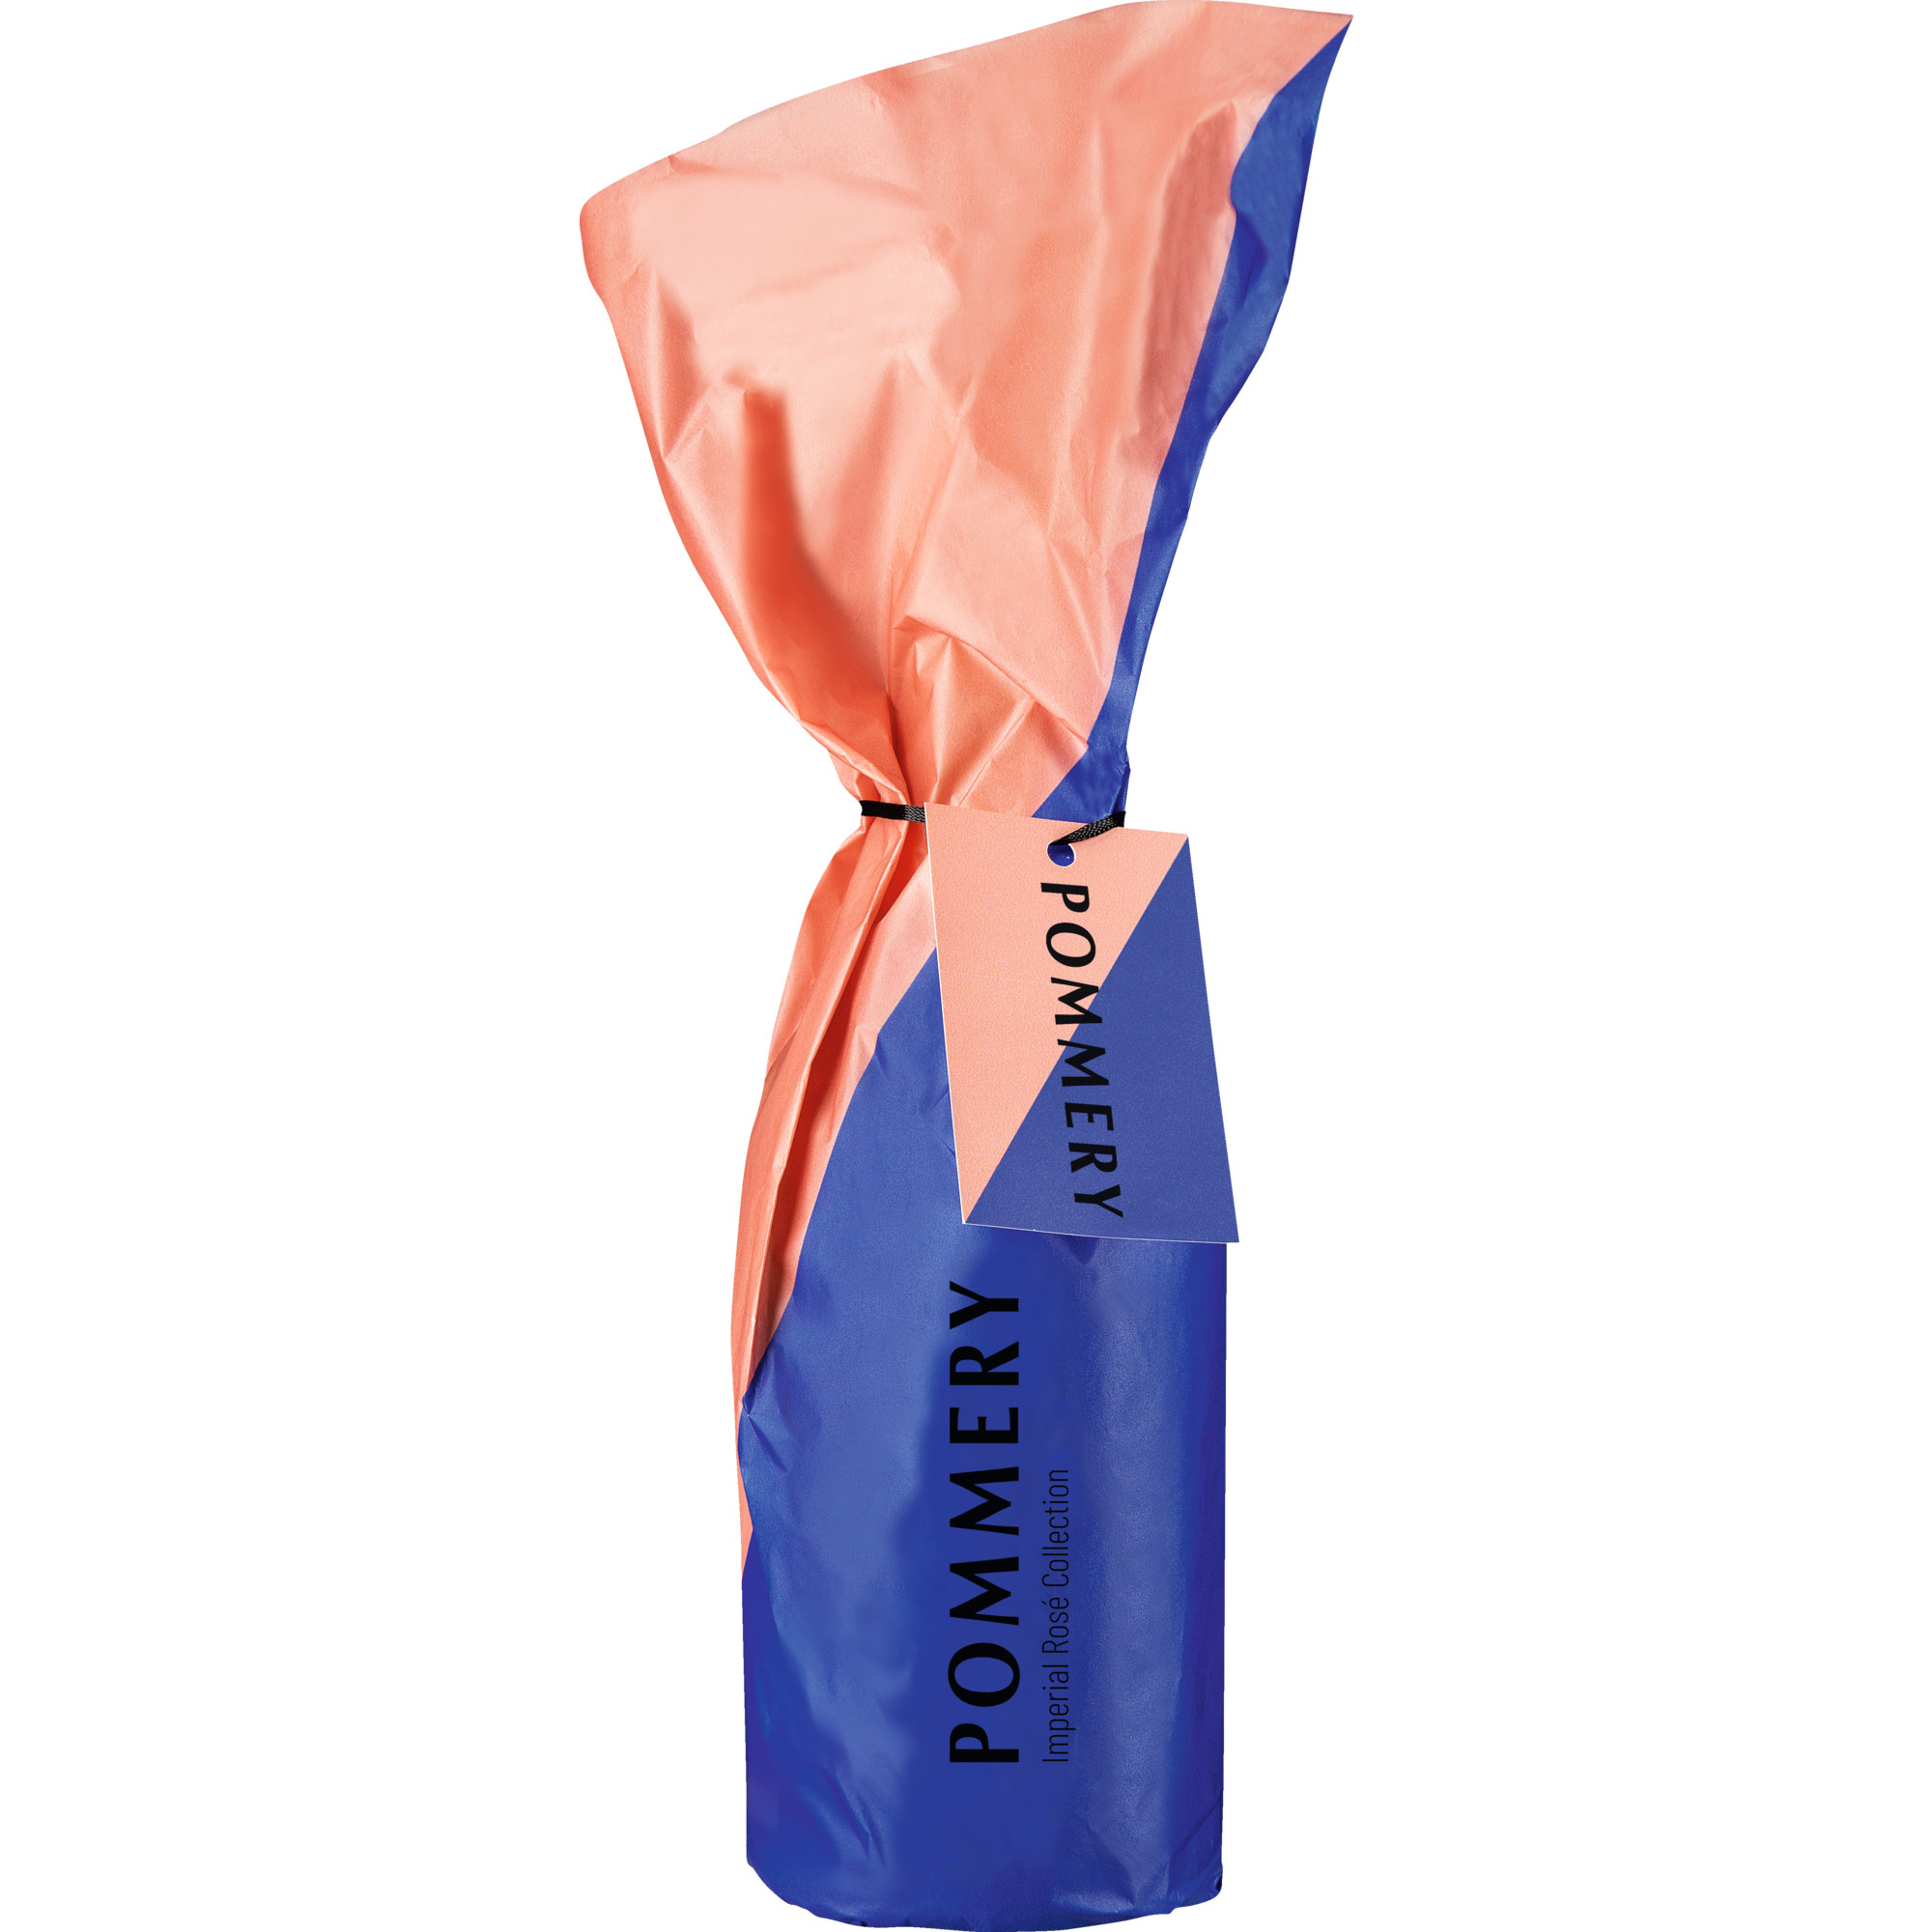 Champagne Pommery Apanage - Imperial Rosé, Champagne AC, in Designpapier, Champagne, Schaumwein  Champagner Hawesko